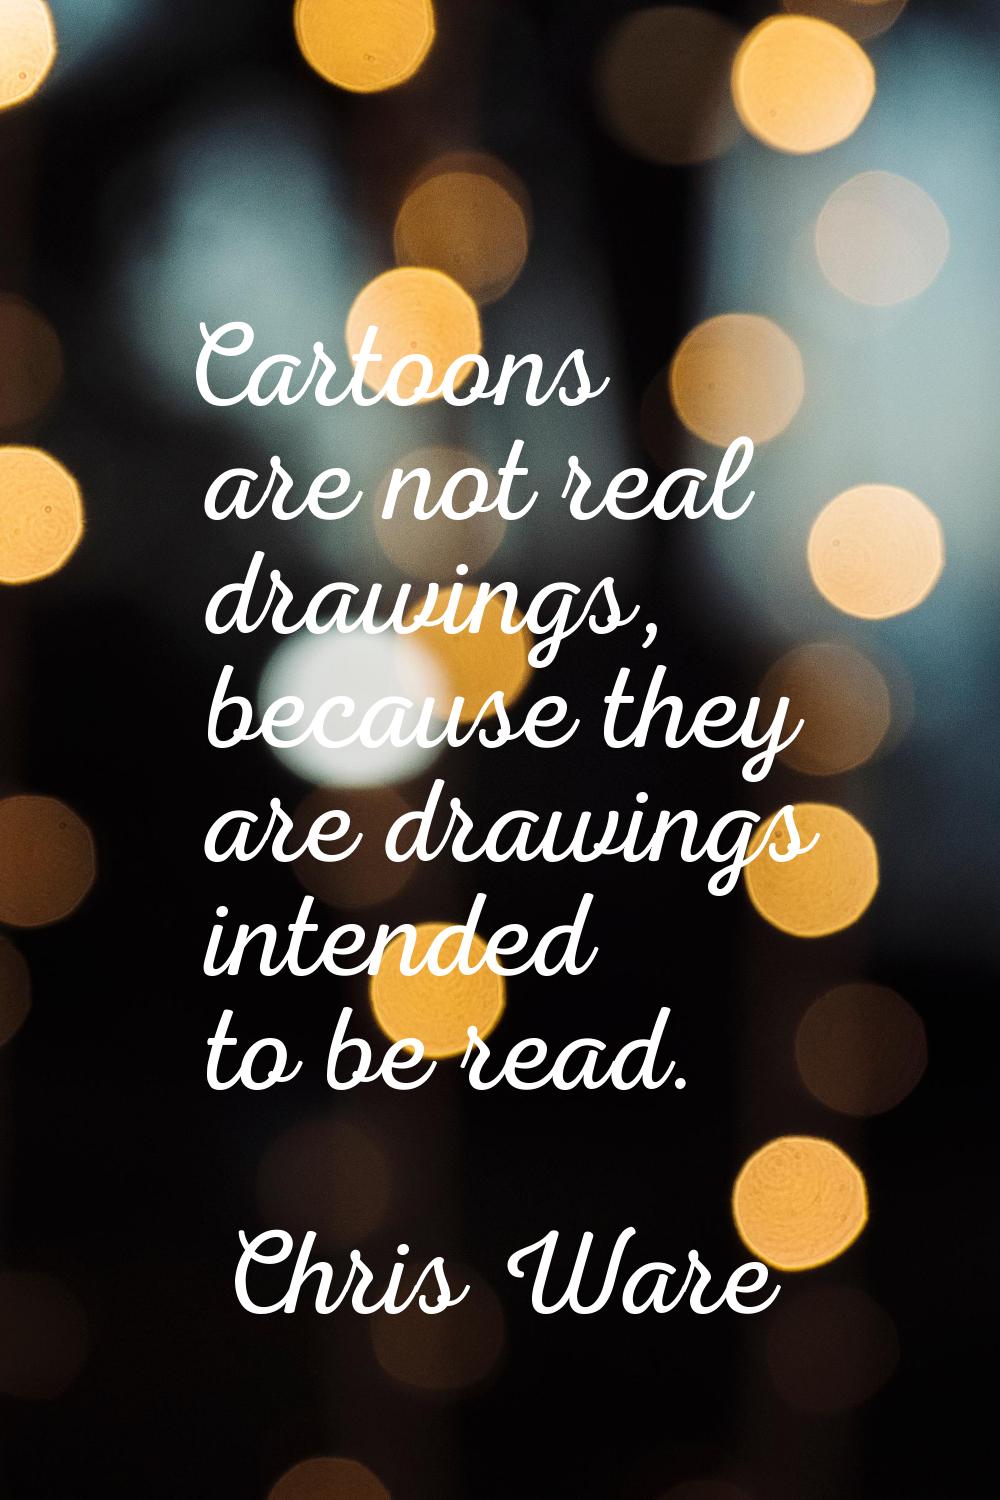 Cartoons are not real drawings, because they are drawings intended to be read.